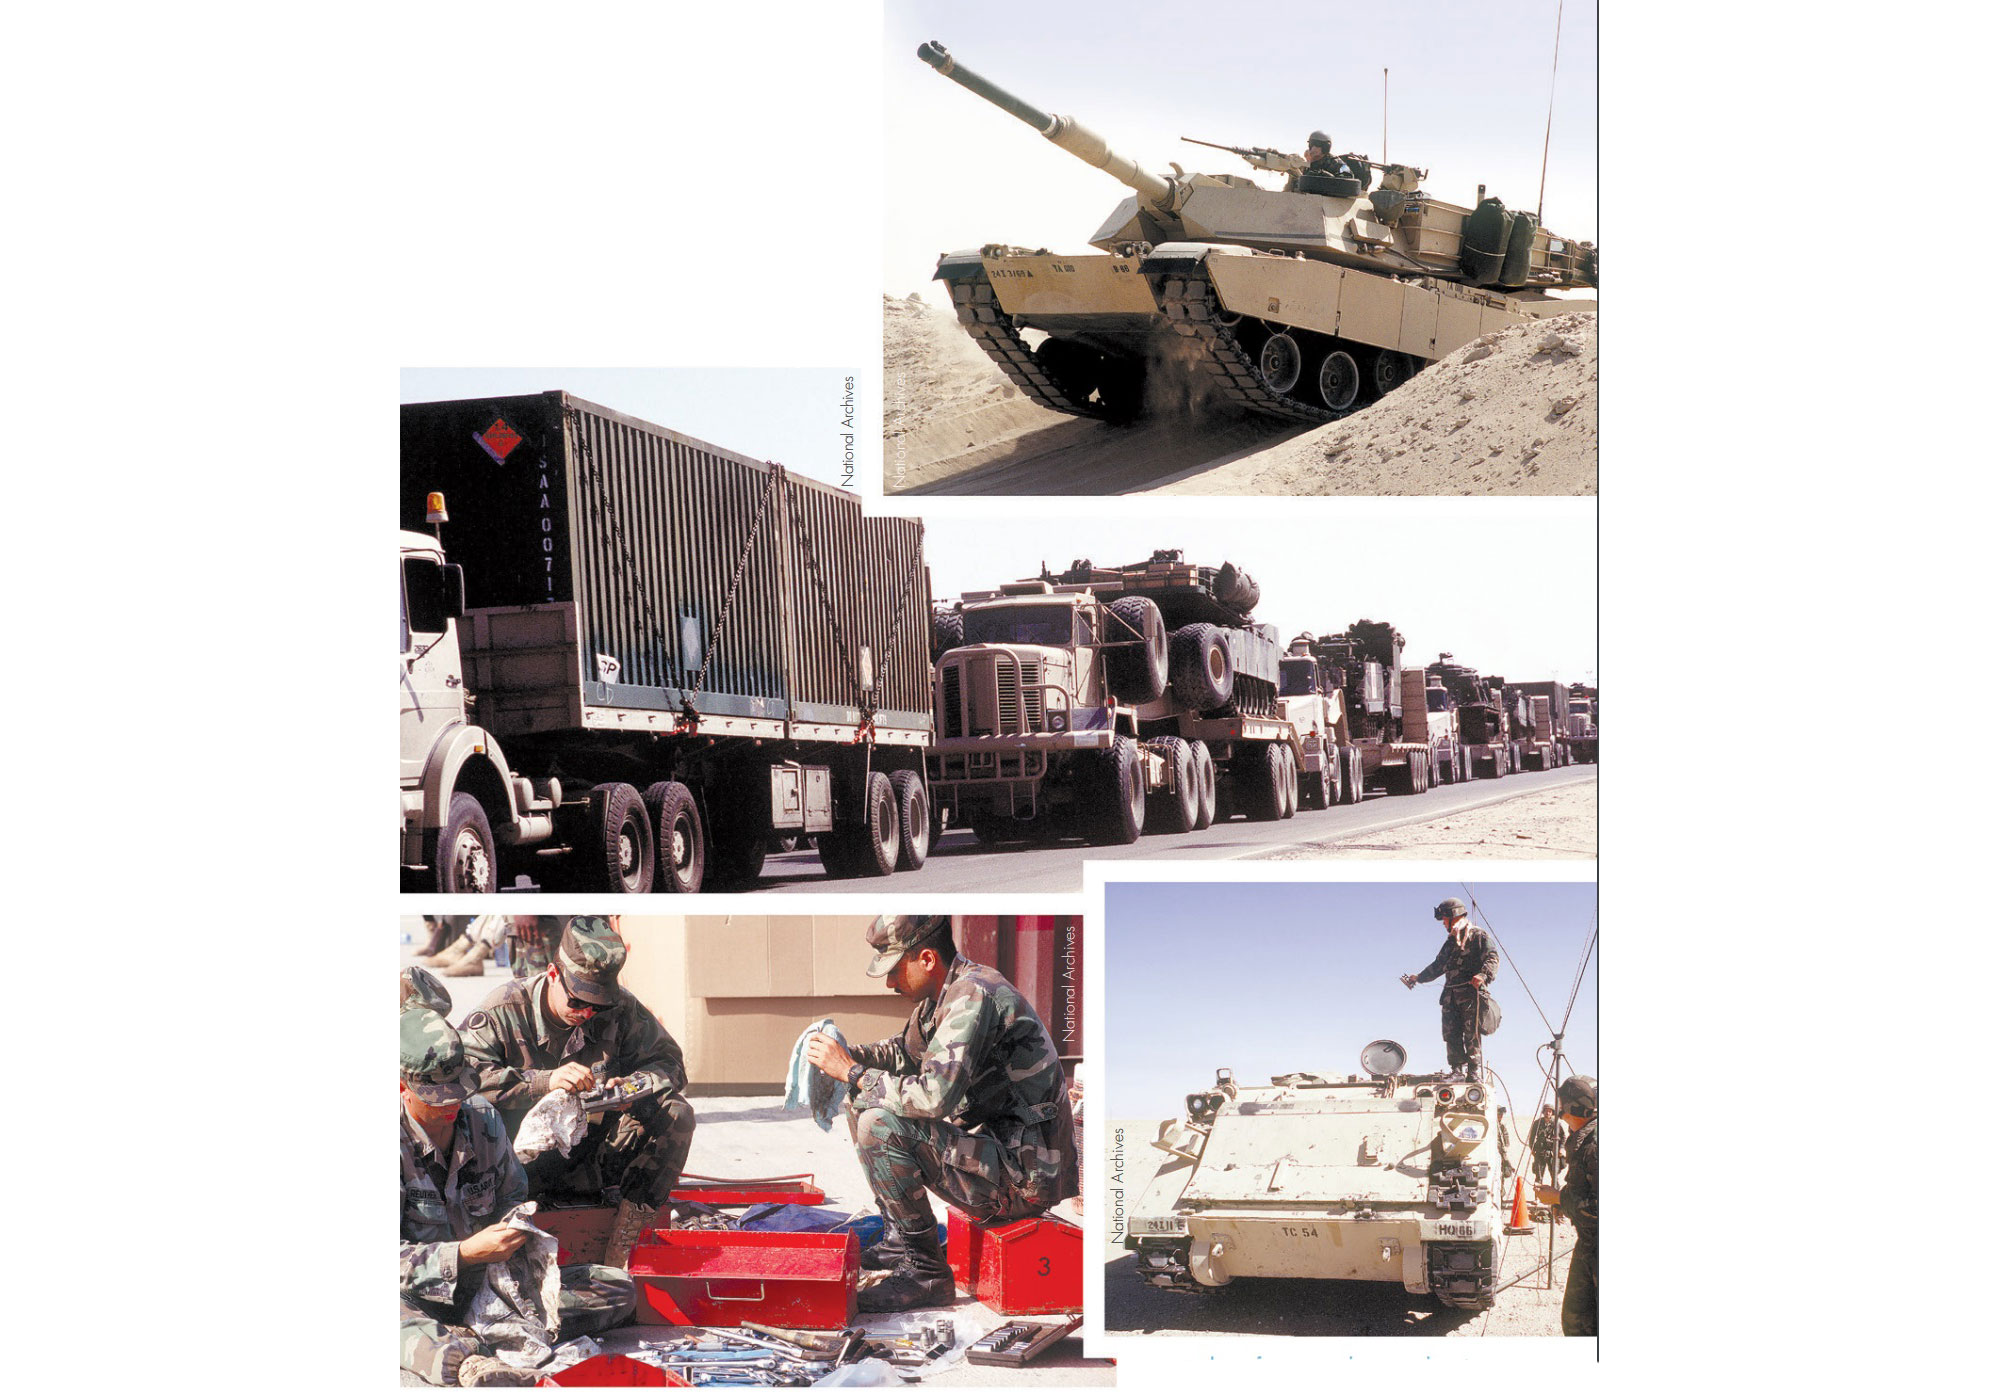 Top right image: An M1A1 Abrams tank crosses a berm in the desert during maneuvers outside the Tactical Assembly Area Liberty. Middle image: A convoy carries materiel needed to support Operation Vigilant Warrior. The convoy is from Company A, 2d Battalion, 69th Armor, 24th Infantry Division, Fort Benning, Georgia. Lower left image: Soldiers from the 24th Infantry Division clean and inventory equipment at the Tactical Assembly Area Liberty during Operation Vigilant Warrior. Lower right image: Crew members of an armored personnel carrier set up a communications antenna outside their vehicle in the desert of Kuwait.